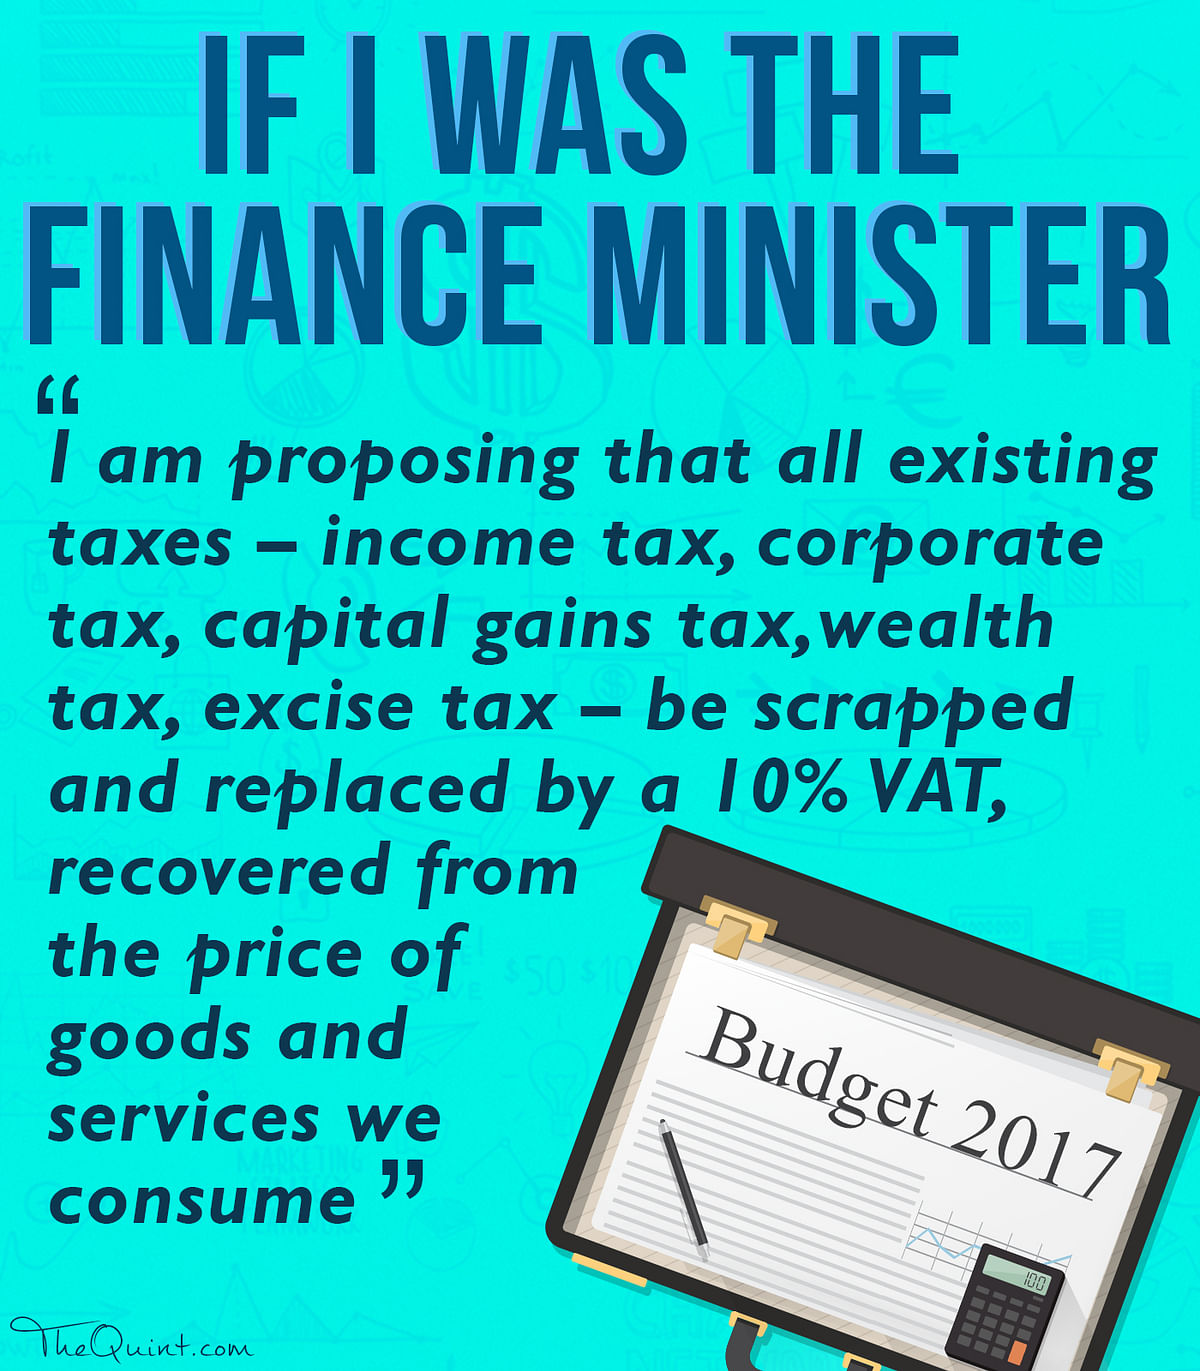 Introducing single tax rate of VAT and revamping social schemes – a budget speech that never saw the light of day.